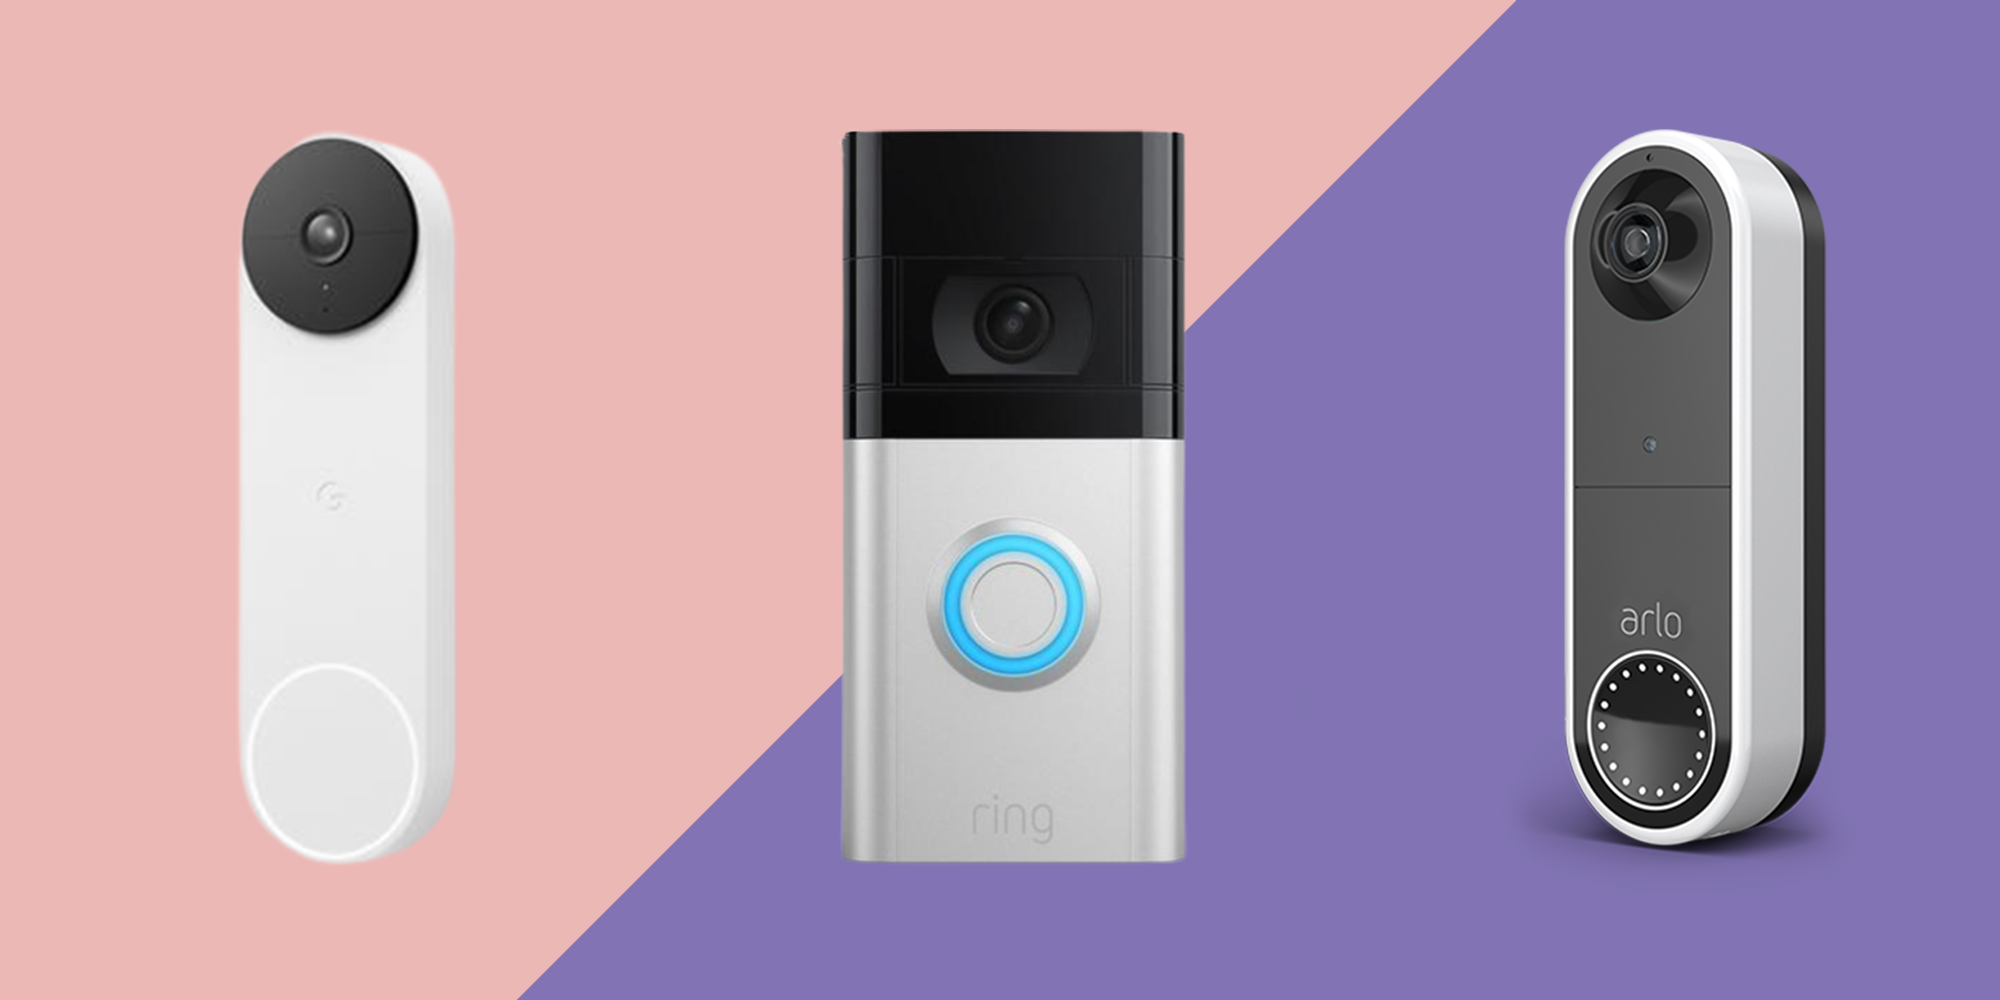 Blink Video Doorbell Review and Pricing in 2024